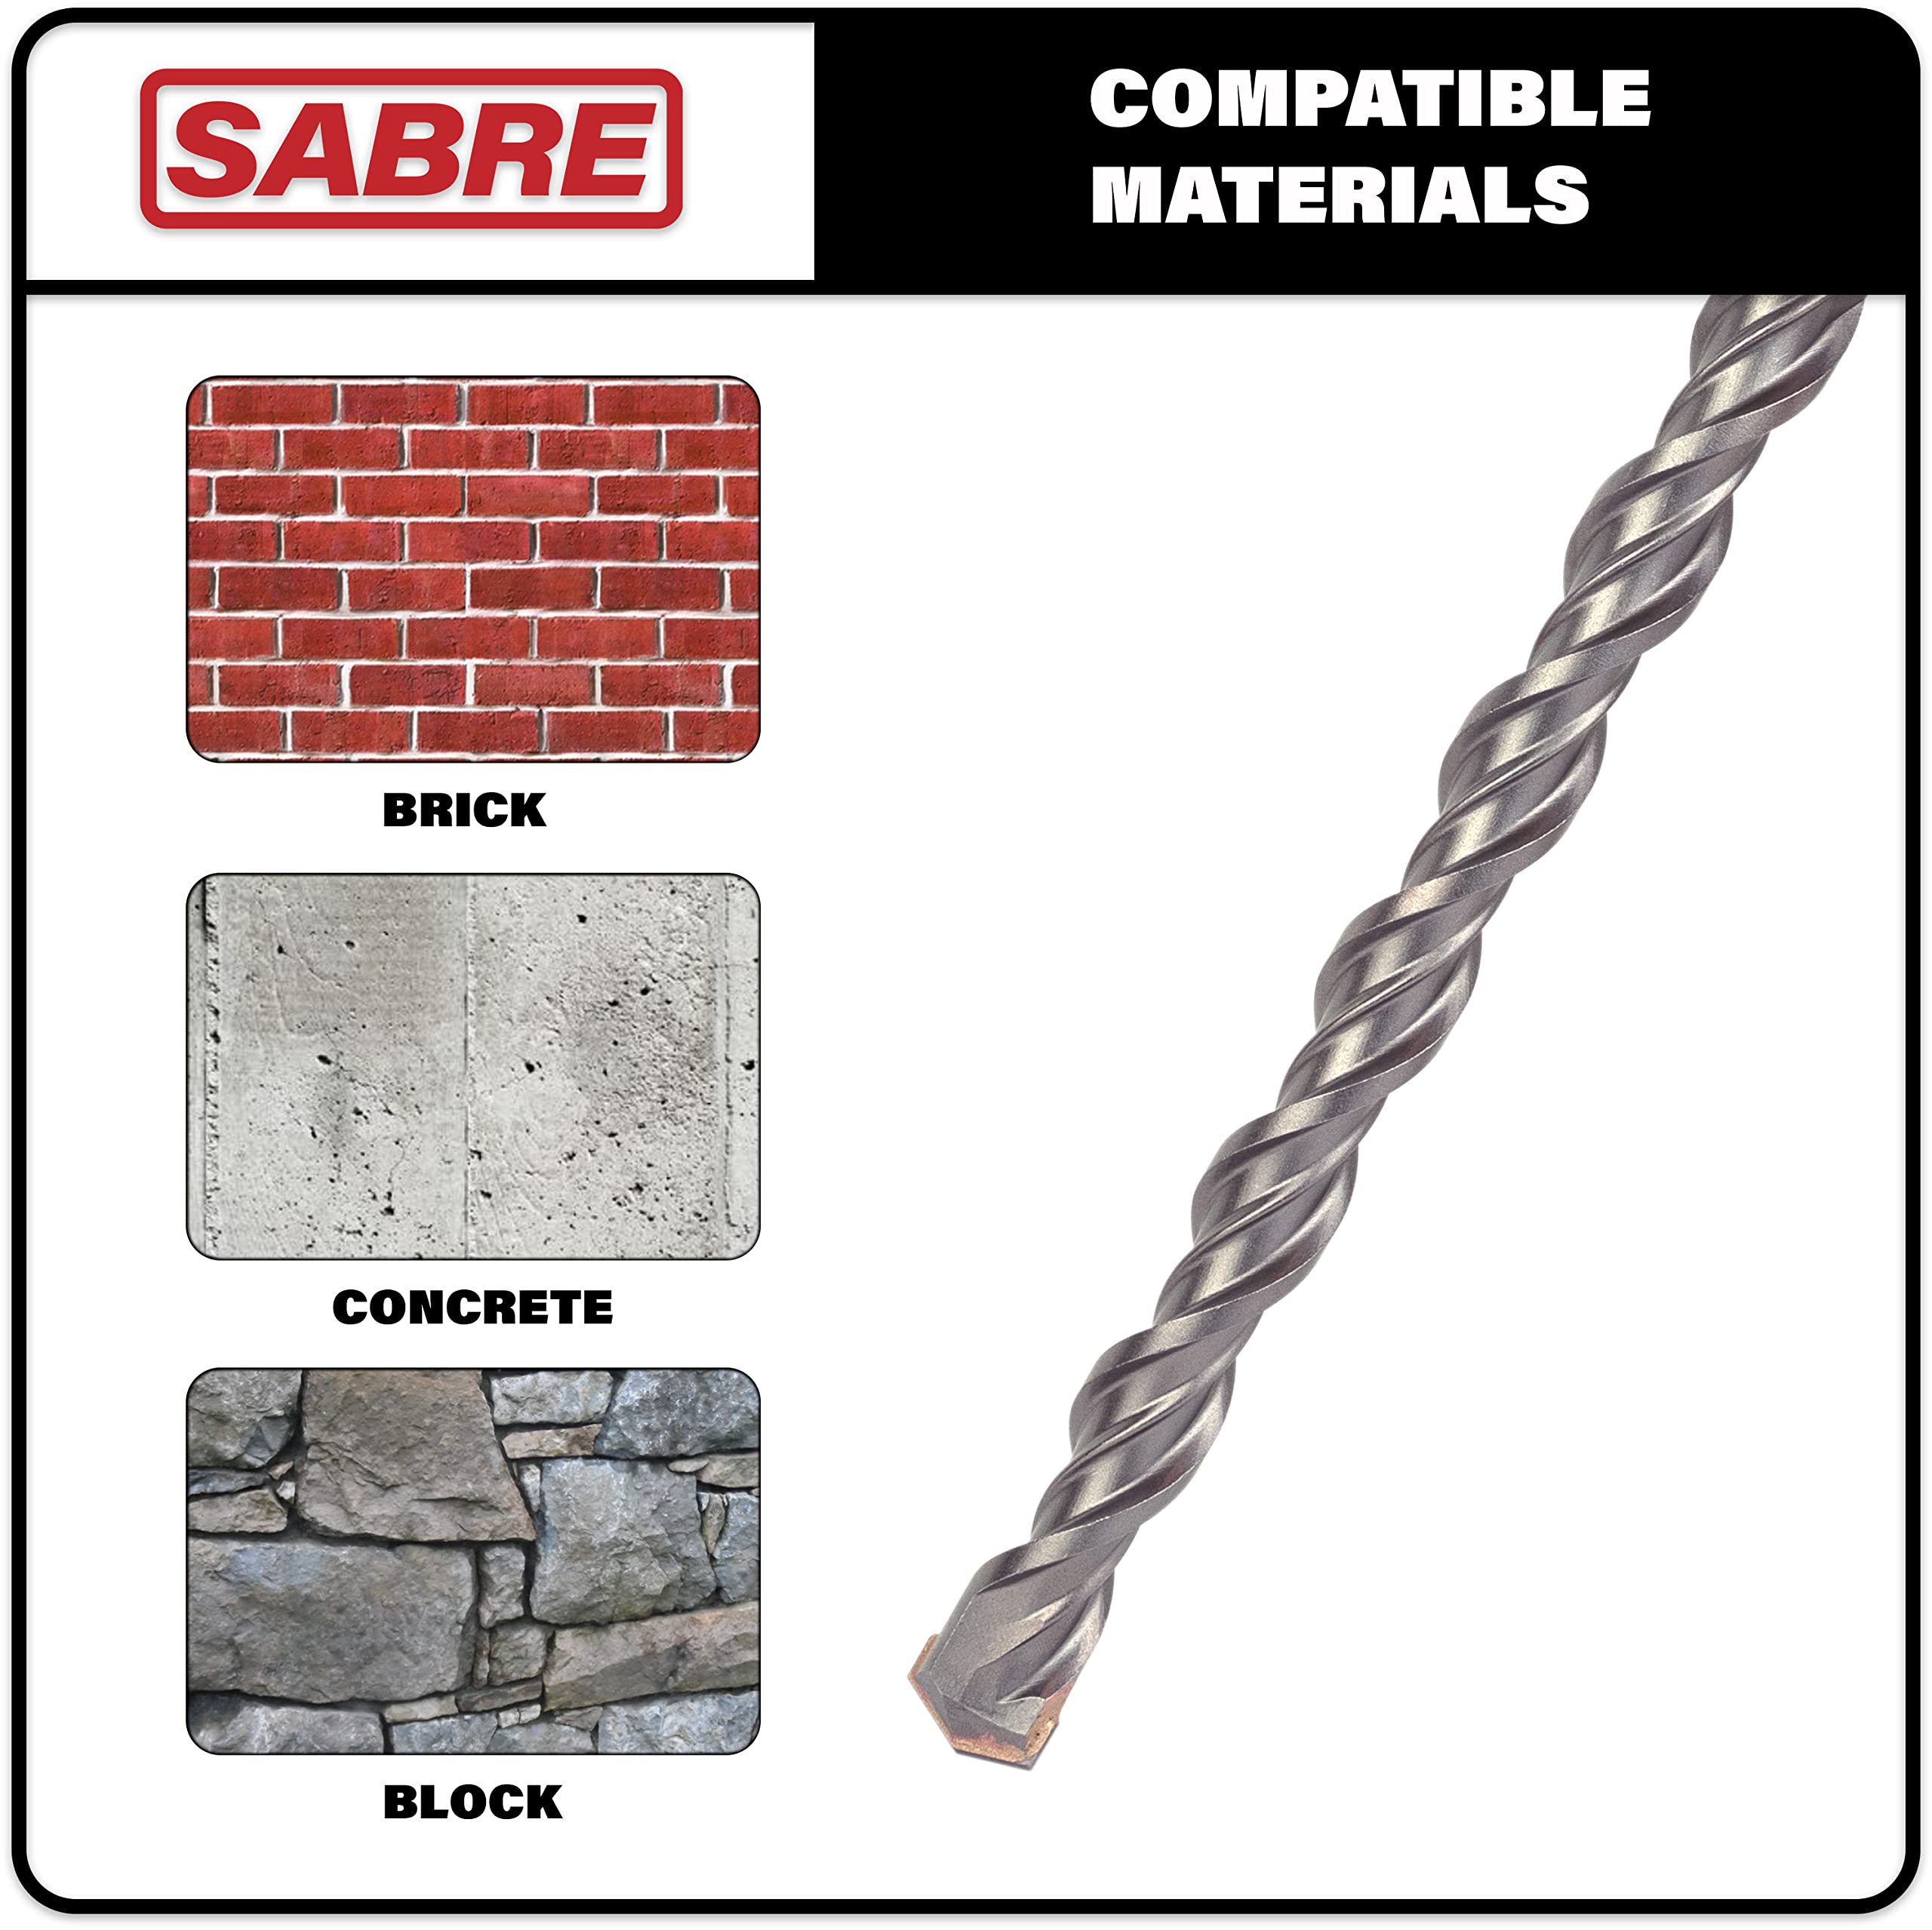 Sabre Tools 1/2 Inch x 12 Inch SDS Plus Rotary Hammer Drill Bit, Carbide Tipped for Brick, Stone, and Concrete Version 2 (1/2" x 10" x 12")